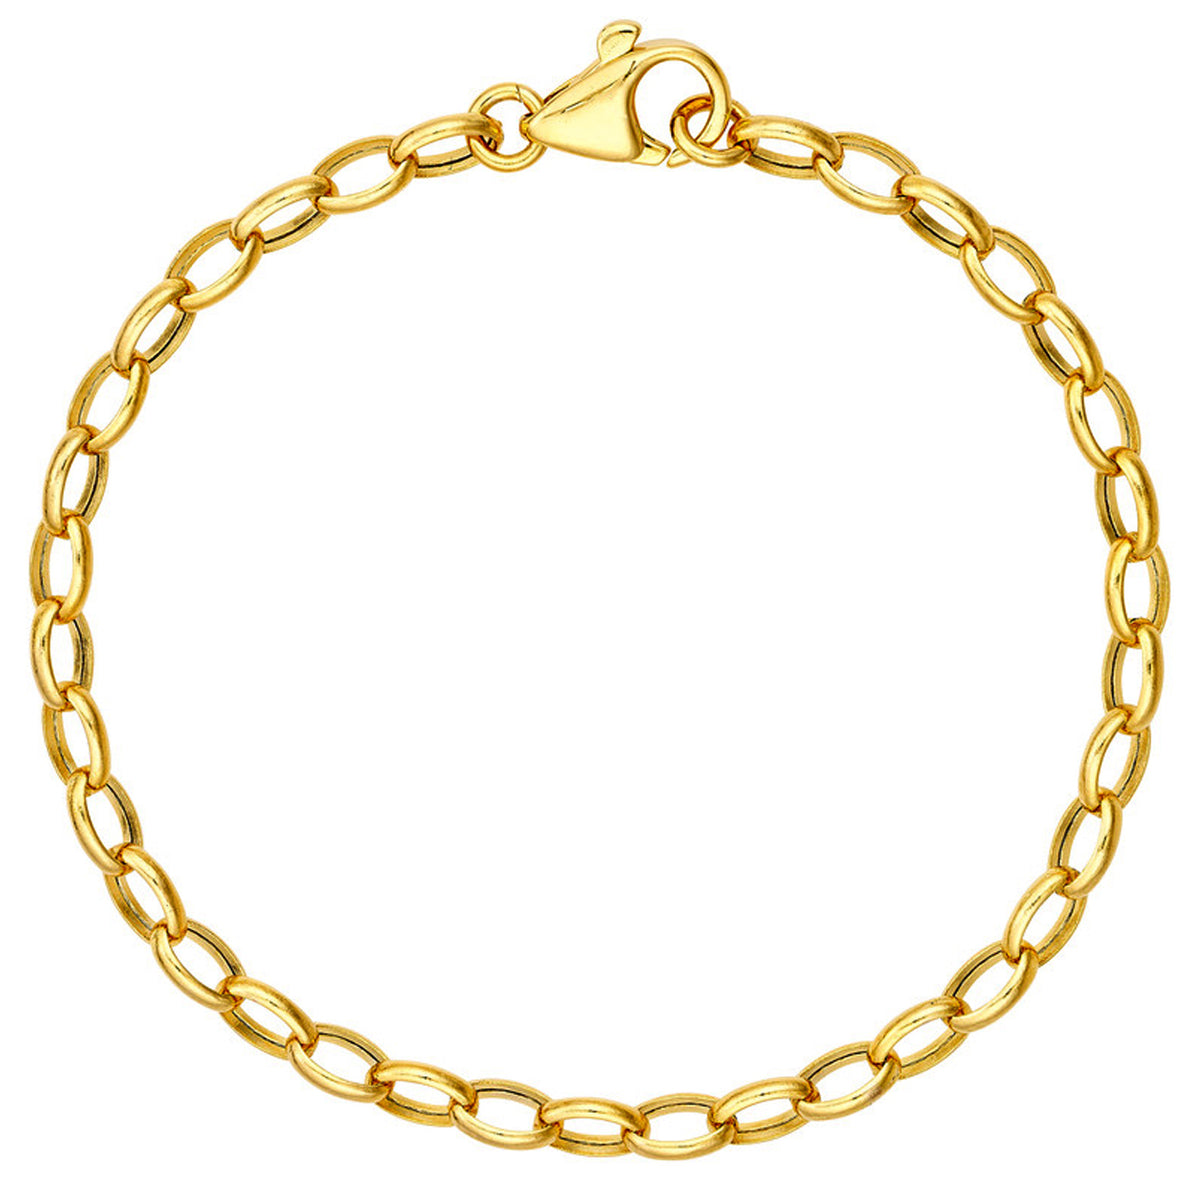 14K Yellow Gold 4.5mm Hollow Oval Forzentina Chain Bracelet with Lobster Lock, 7.5 inches